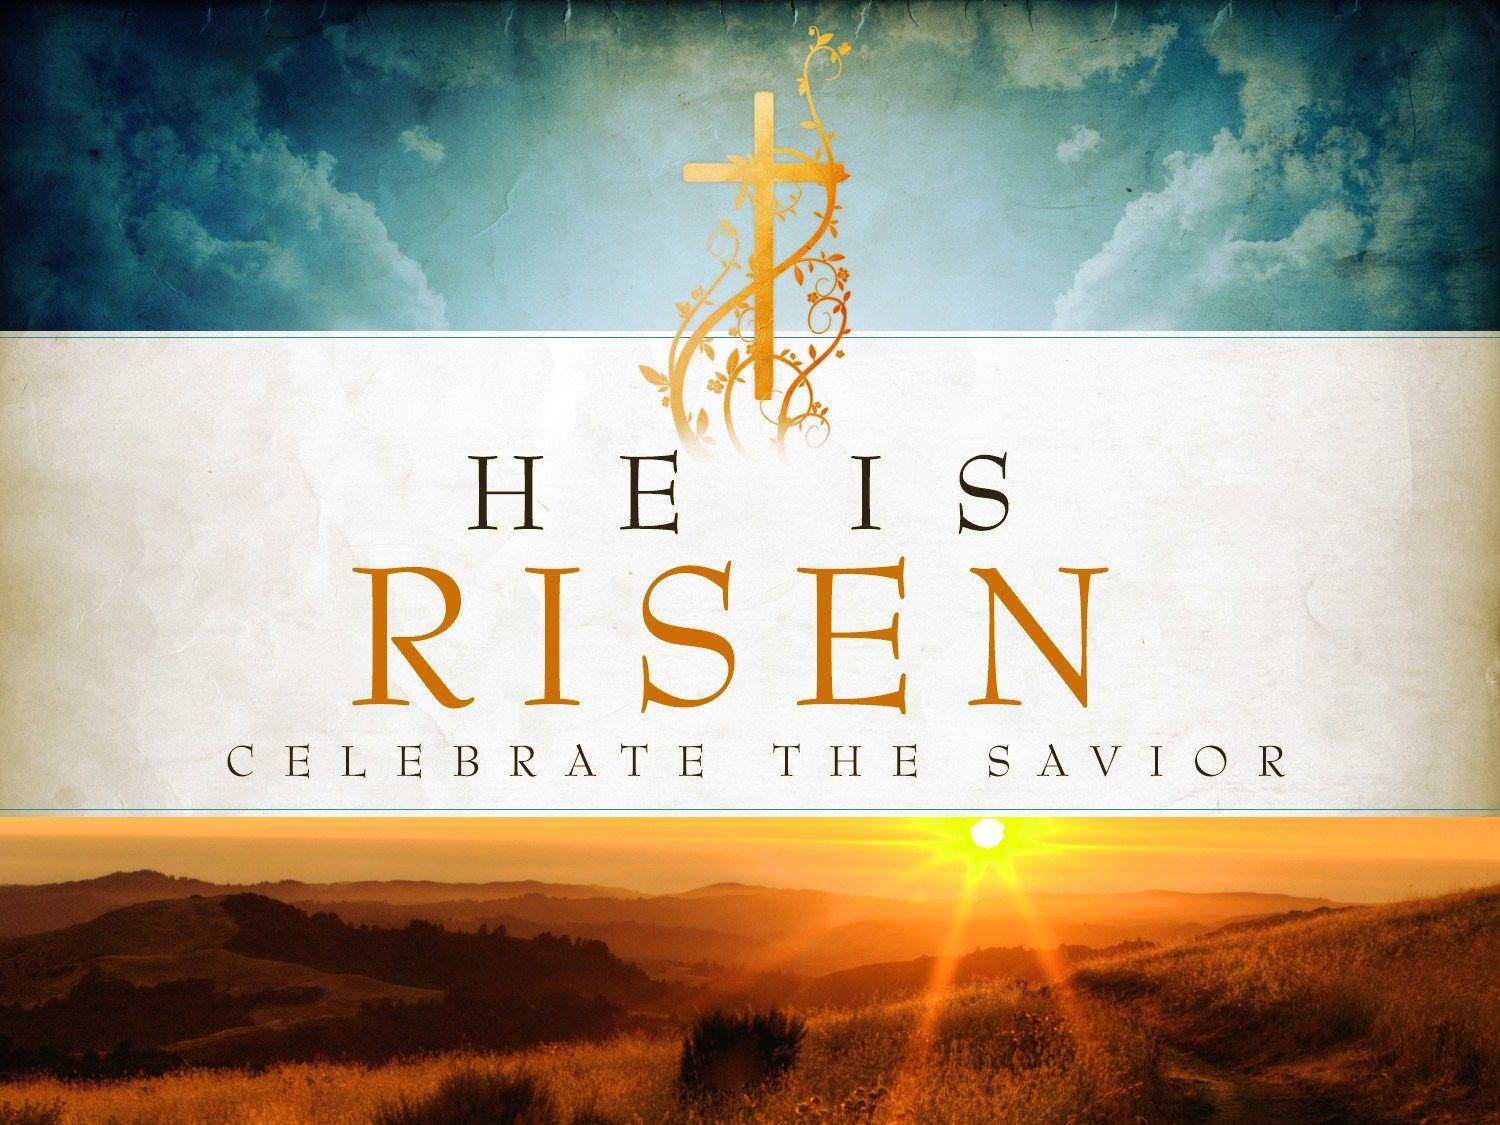 Free Happy Easter Image 2019 to Download. Religious Easter